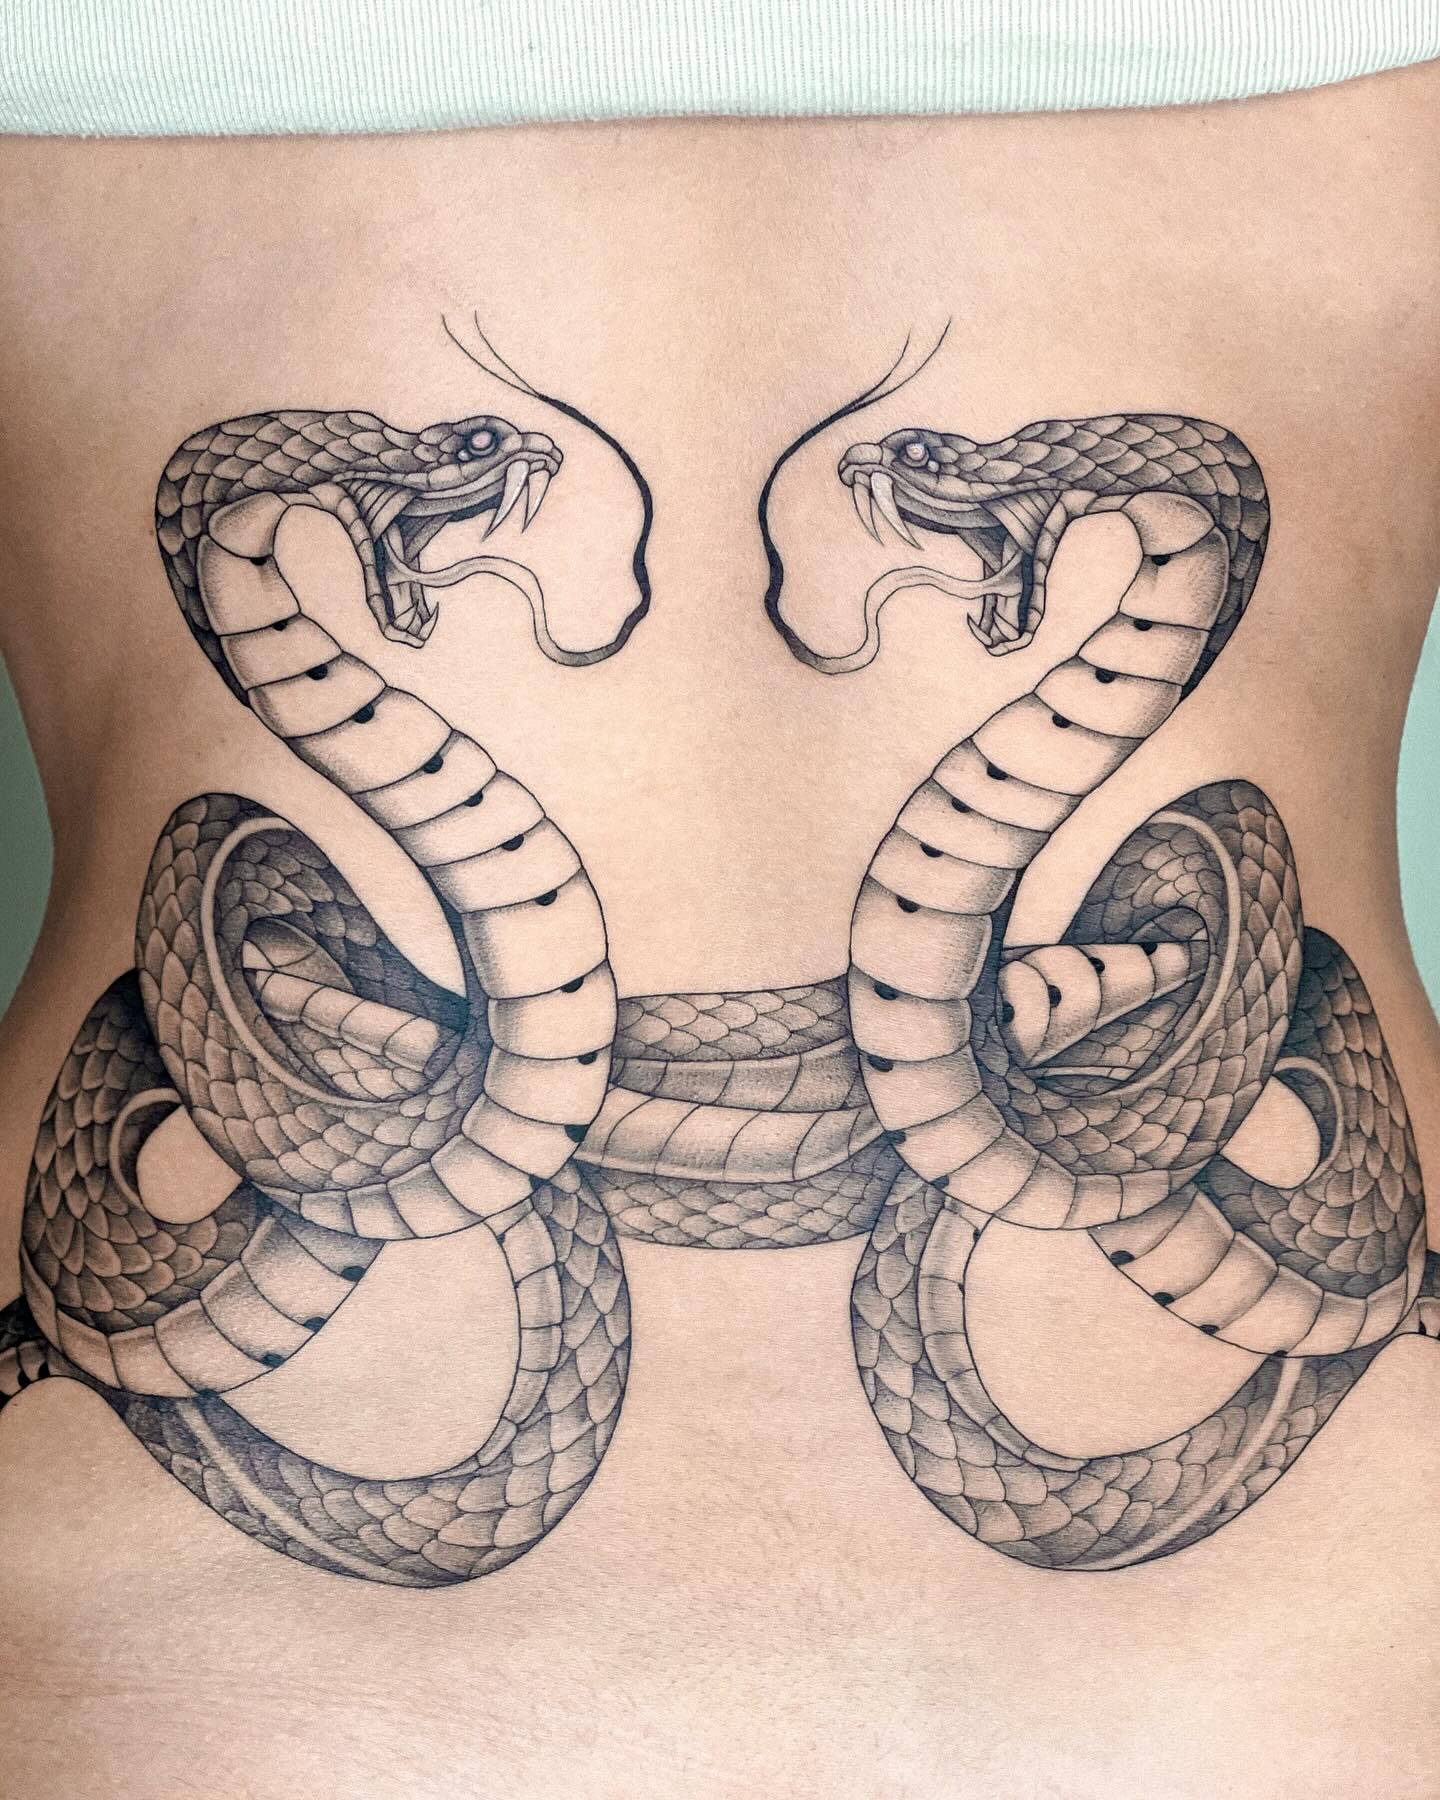 intertwined snakes tattoo